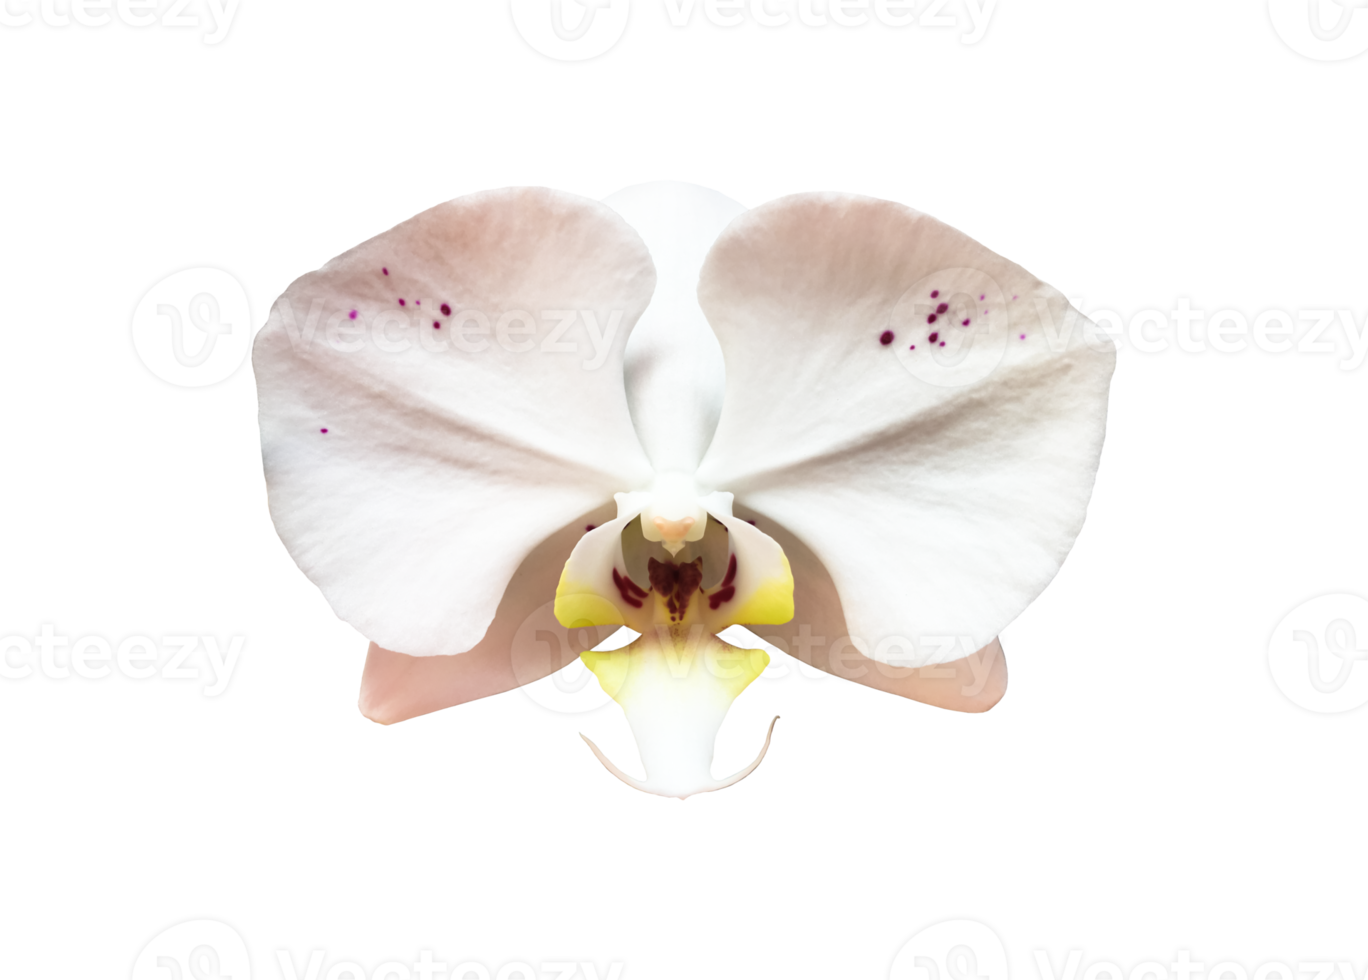 isolated vanda orchid flower with clipping paths. png